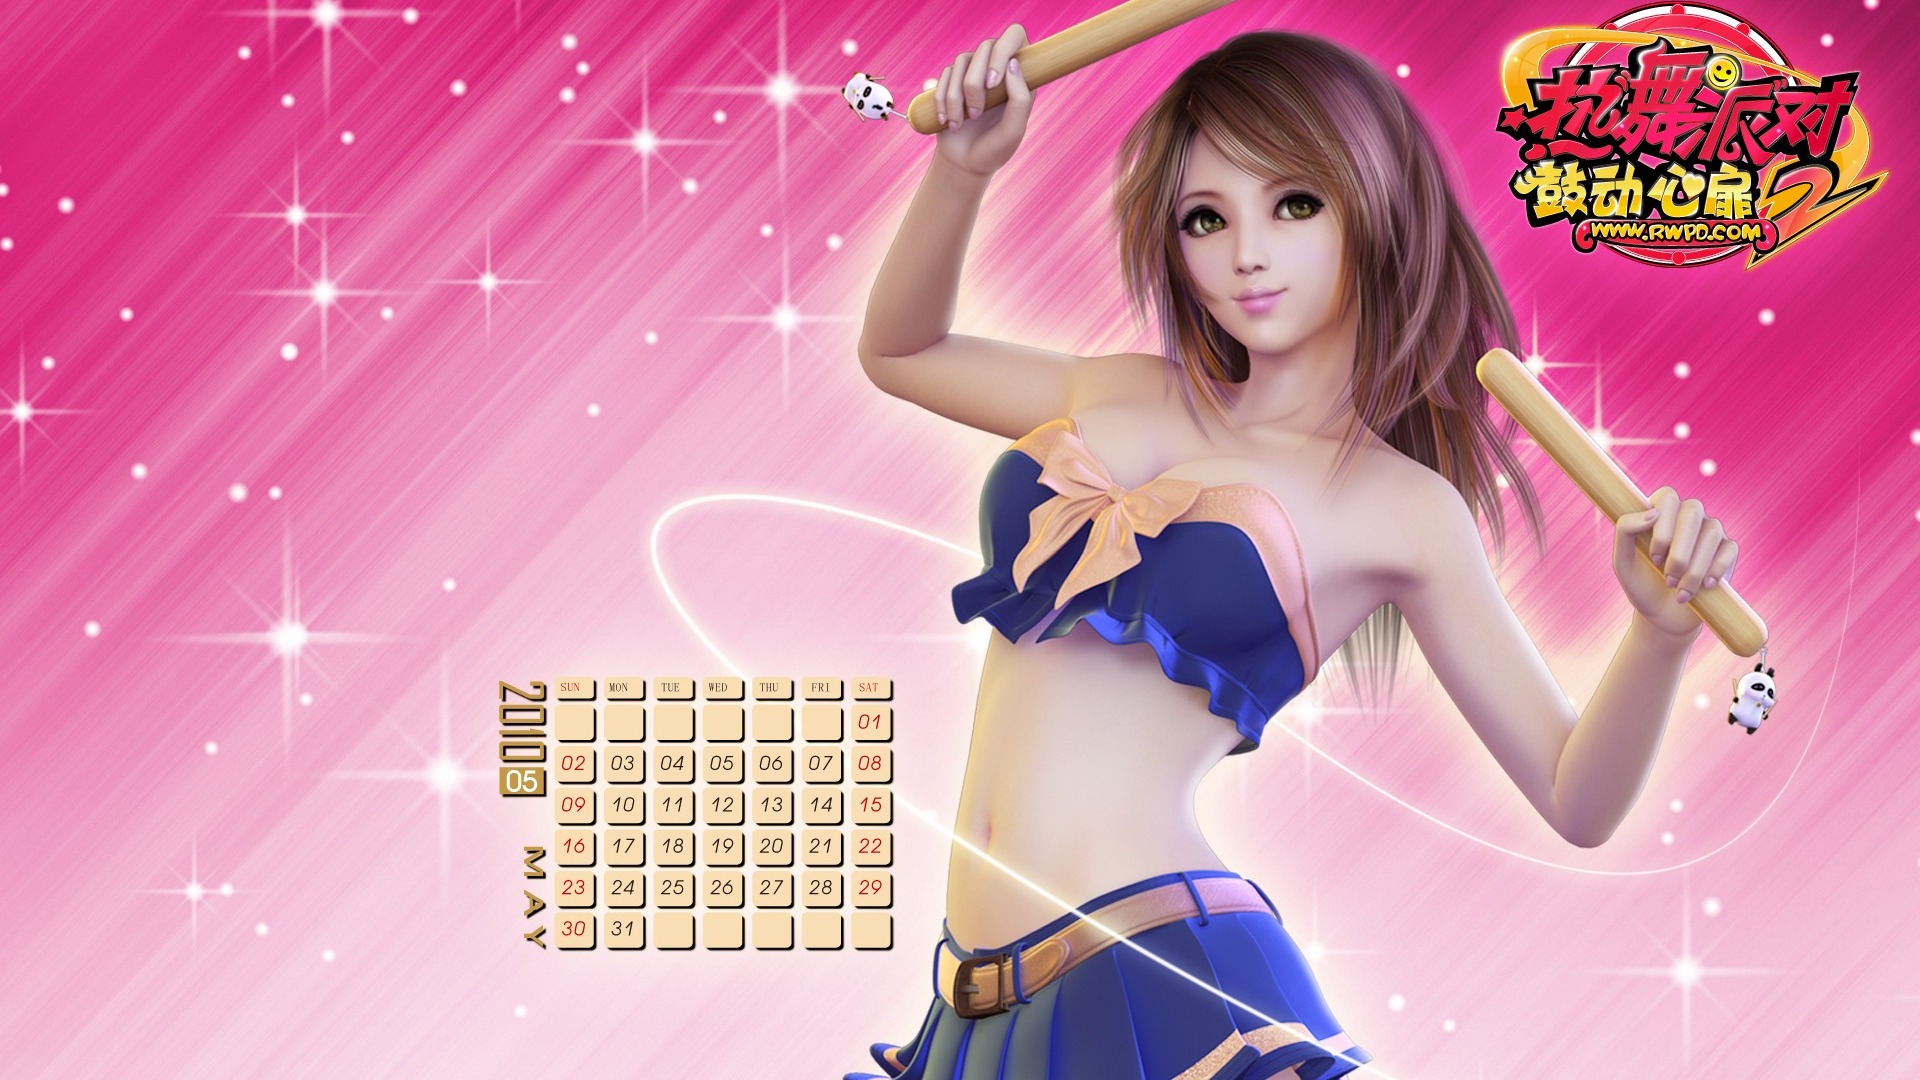 Online game Hot Dance Party II official wallpapers #24 - 1920x1080